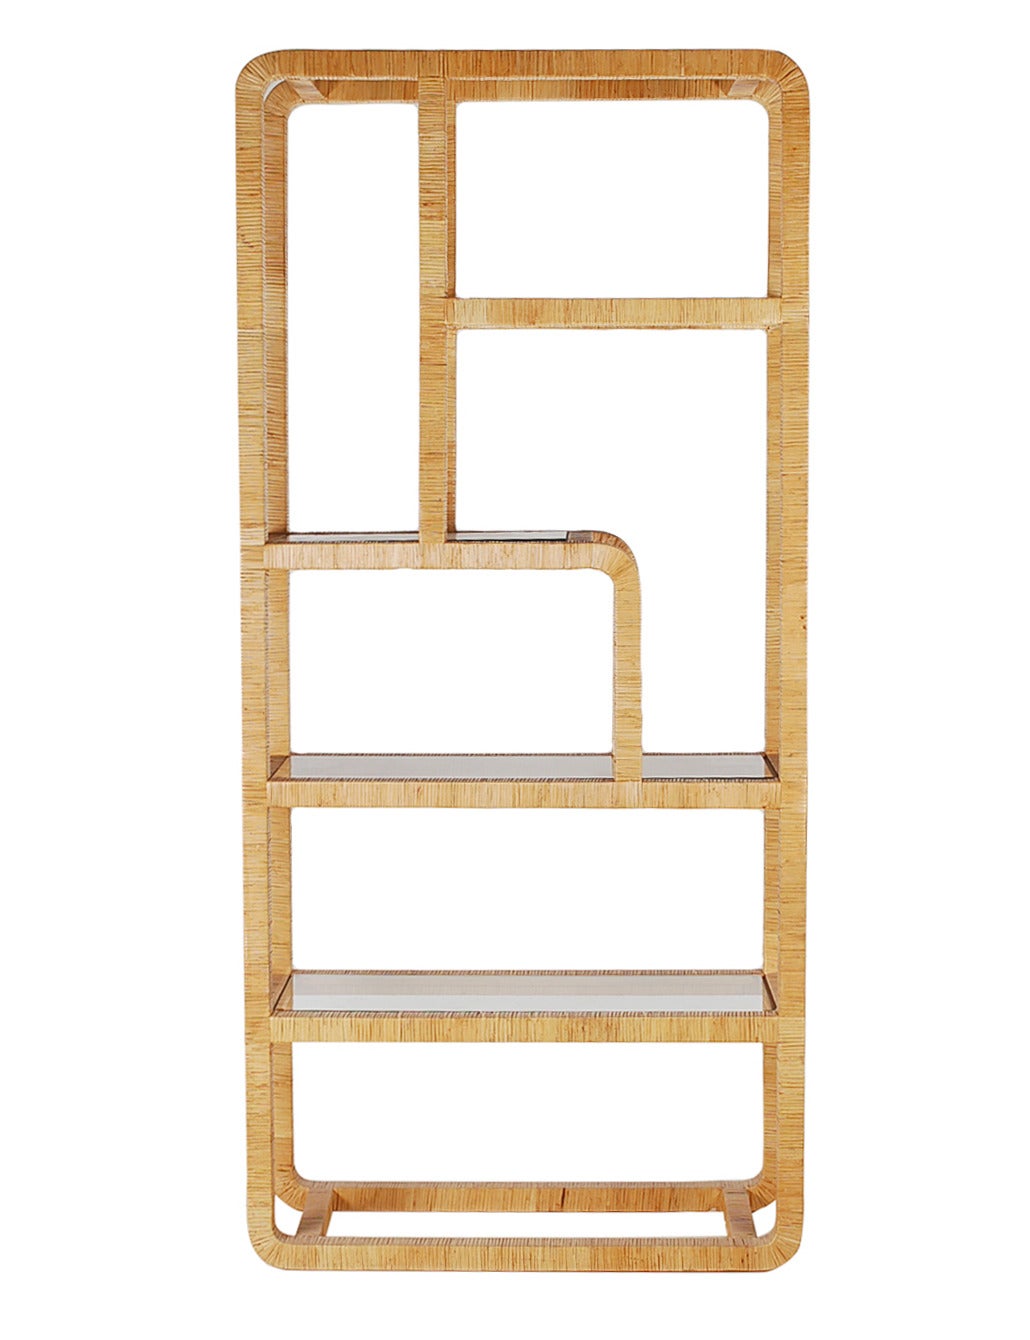 A stylish asymmetrical designed etagere. It features four glass shelves and rattan wrapped. Will work well with Milo Baughman or Franco Albini furniture.